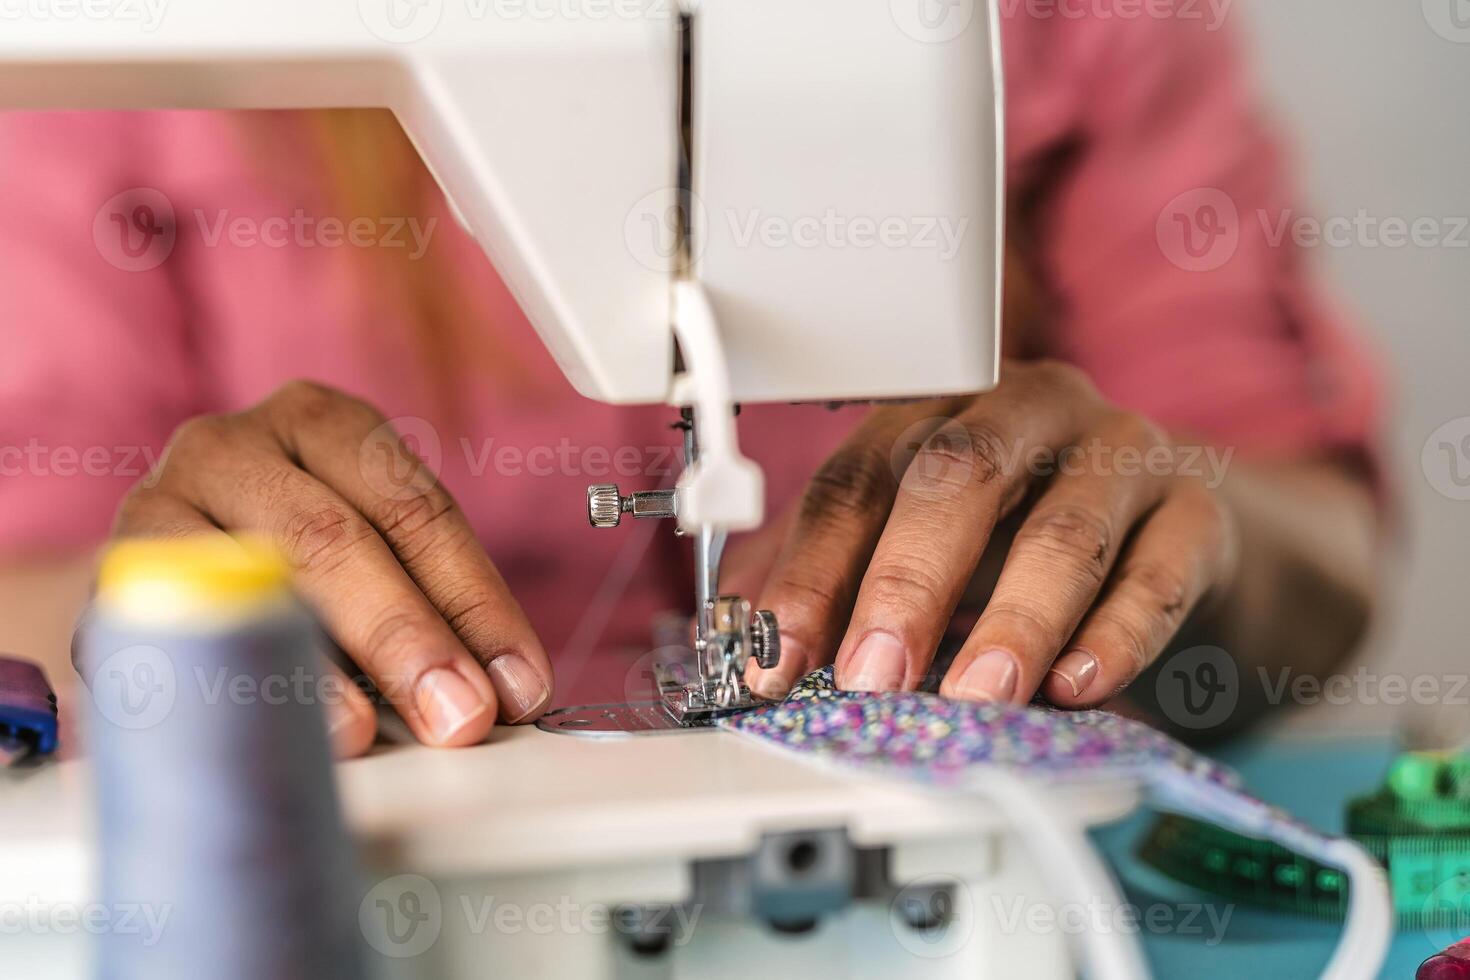 Close up Latin female hands sewing with sew machine homemade medical face mask for preventing and stop corona virus spreading - textile industry and covid19 healthcare concept photo